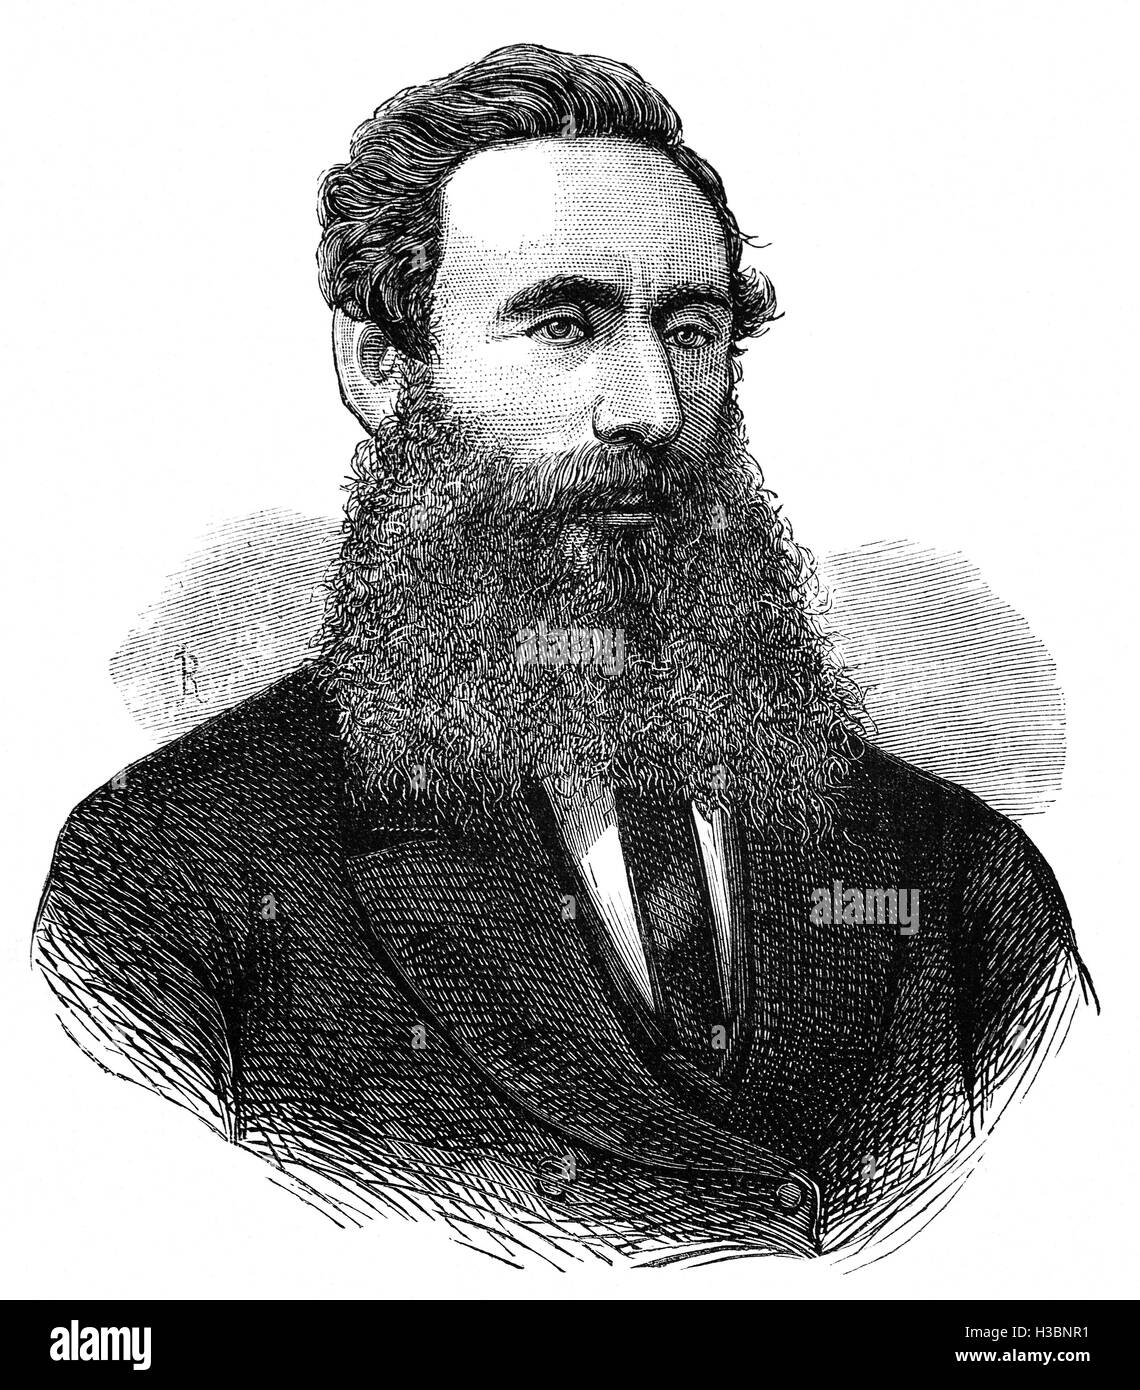 Anthony John Mundella (1825 – 1897), known as A. J. Mundella, was an English manufacturer, reformer and Liberal Party politician who sat in the House of Commons from 1868 to 1897. He was an early advocate of compulsory education in England and rendered valuable service in connection with the Elementary Education Act of 1870, and the educational code of 1882, which became known as the 'Mundella Code'. Stock Photo